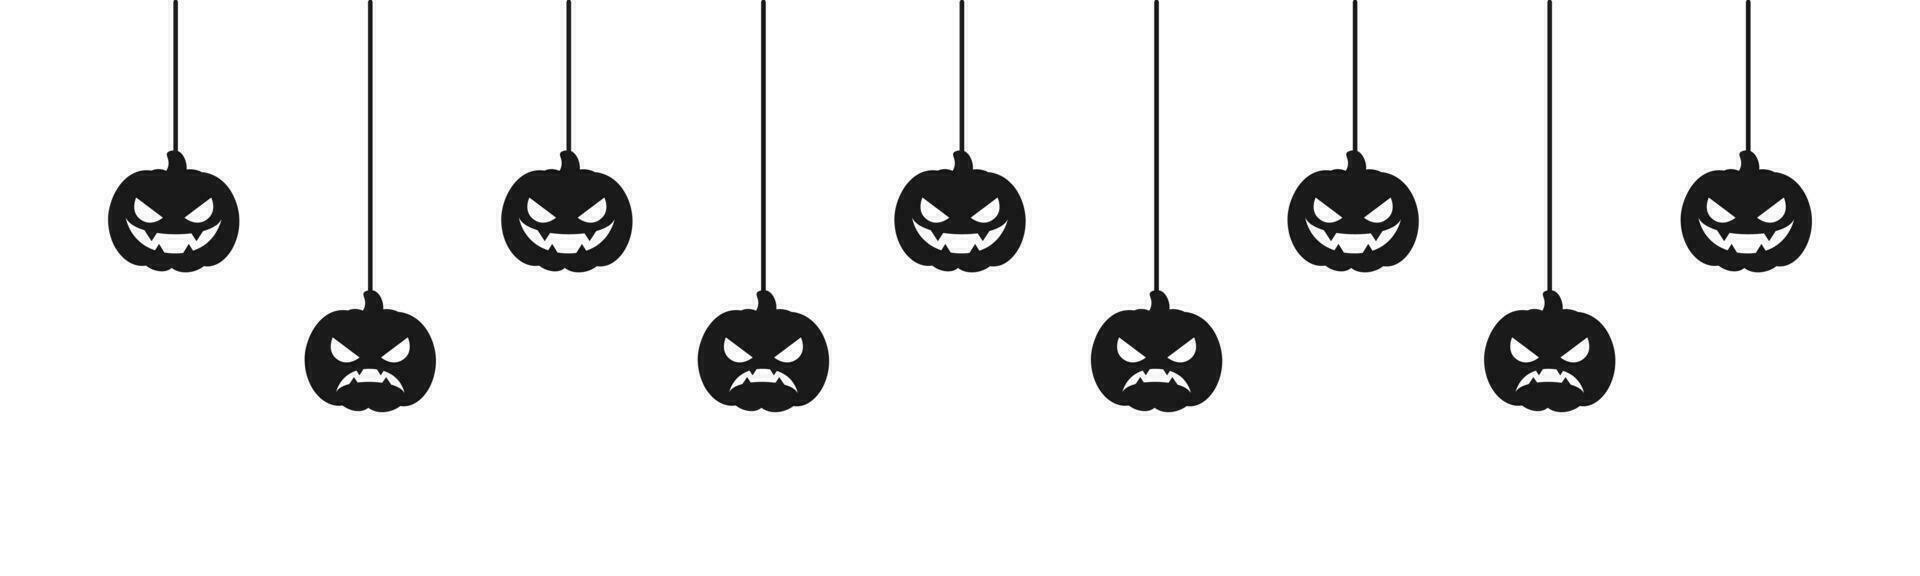 Happy Halloween banner or border with spider web and jack o lantern pumpkins. Hanging Spooky Ornaments Decoration Vector illustration, trick or treat party invitation